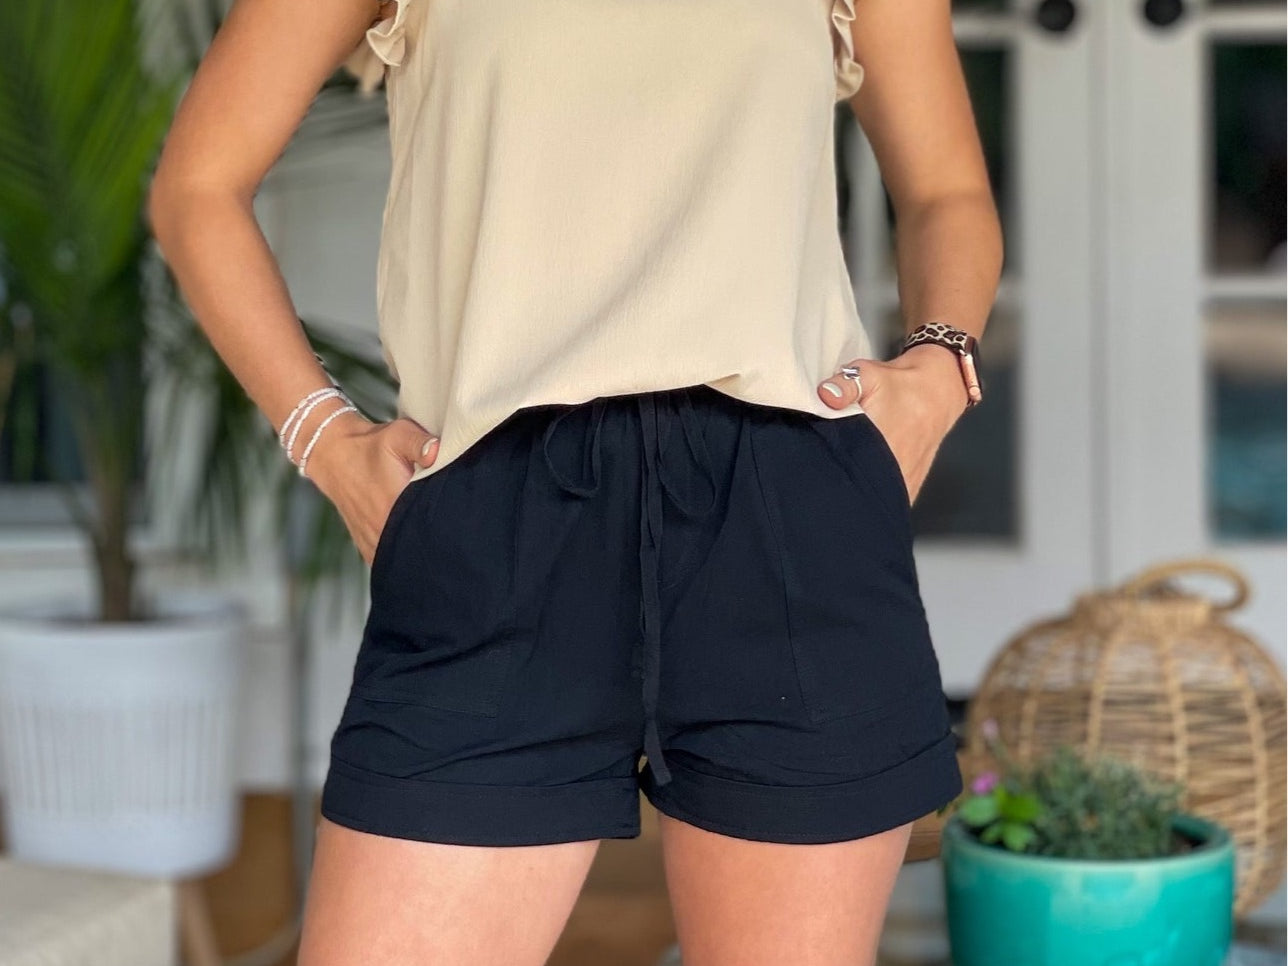 Black cotton causal shorts for women.